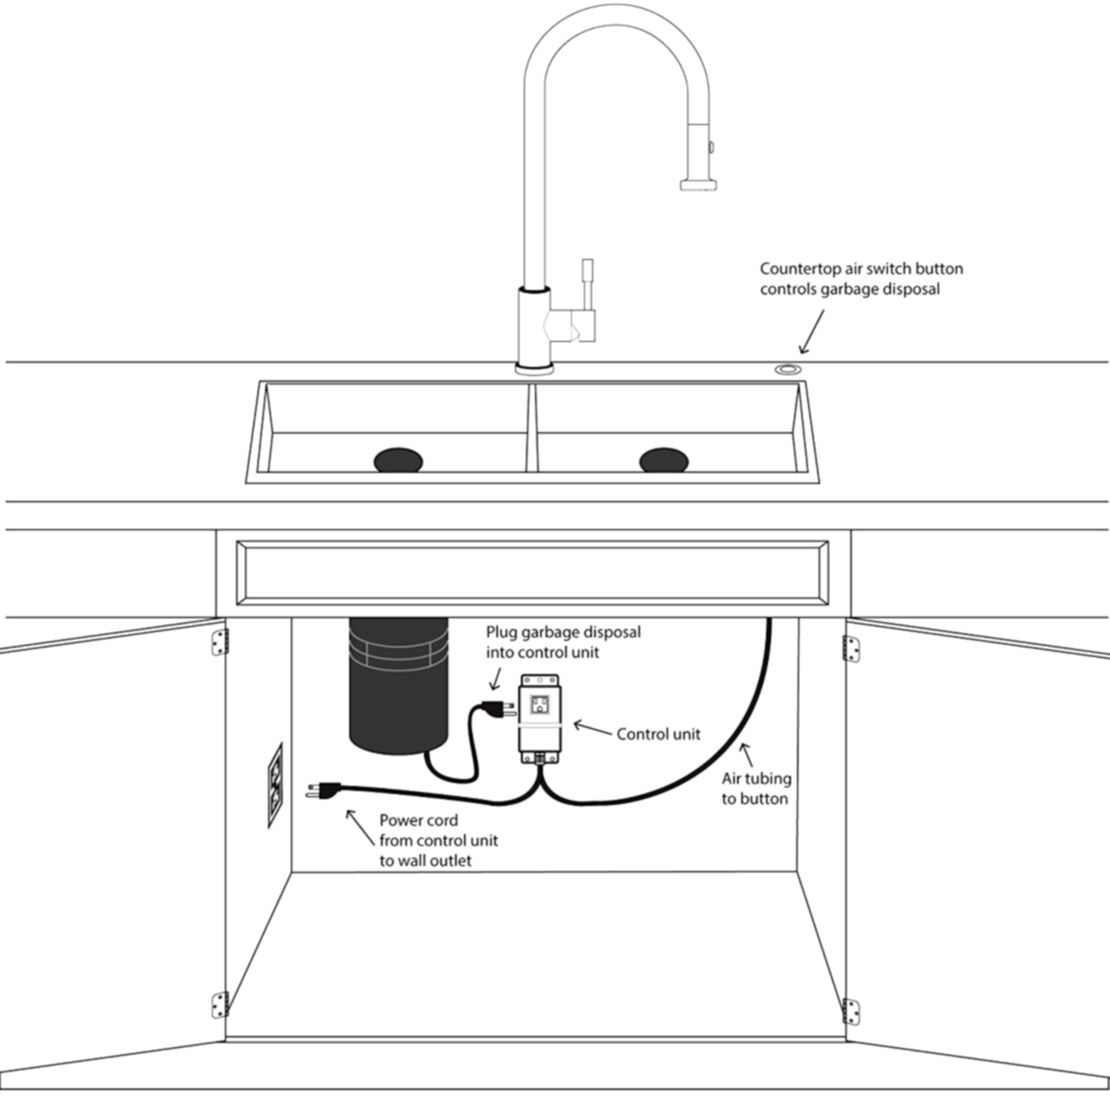 Electrical Wiring Diagram For A Garbage Disposal And Dishwasher - Garbage Disposal Wiring Diagram